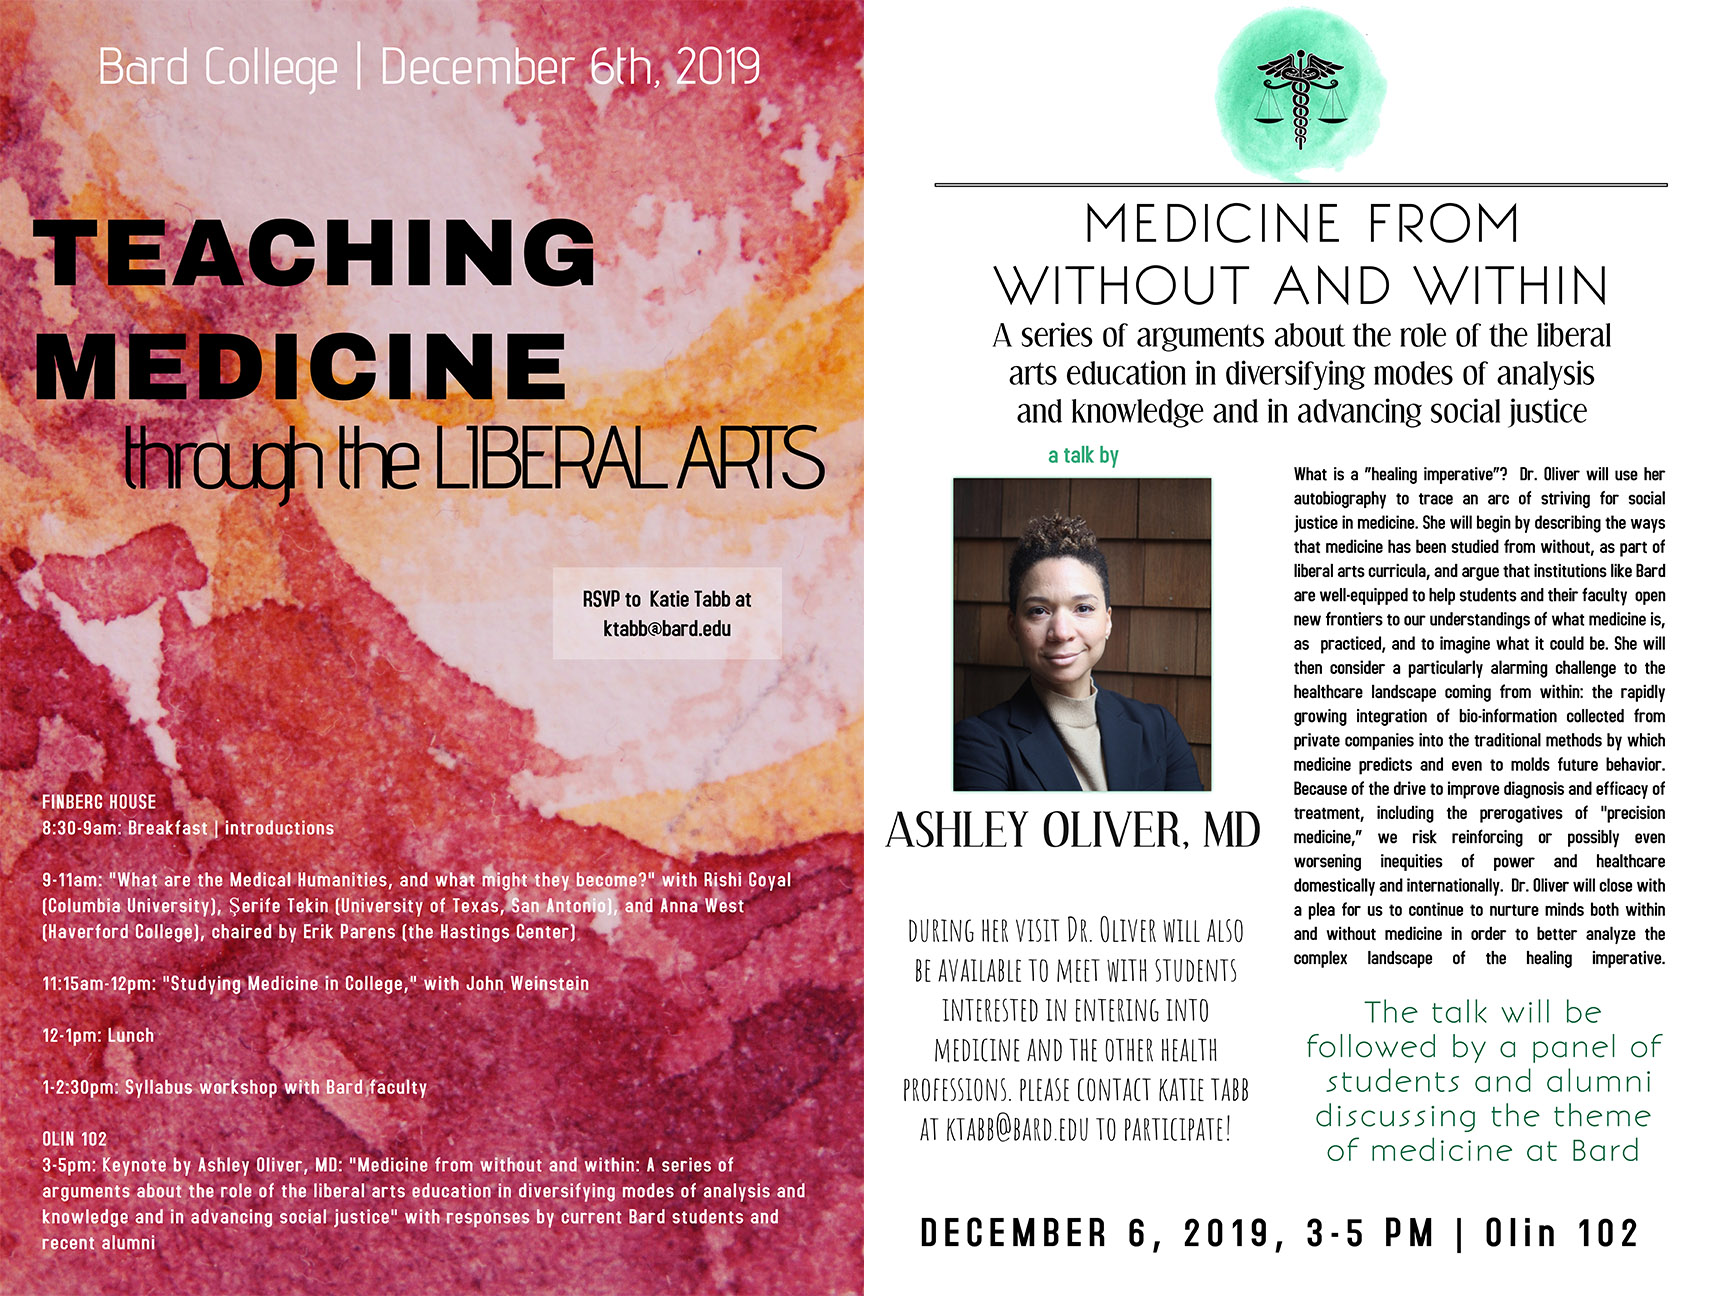 Flyers for Bard College Conference and Dr. Oliver's Keynote Lecture